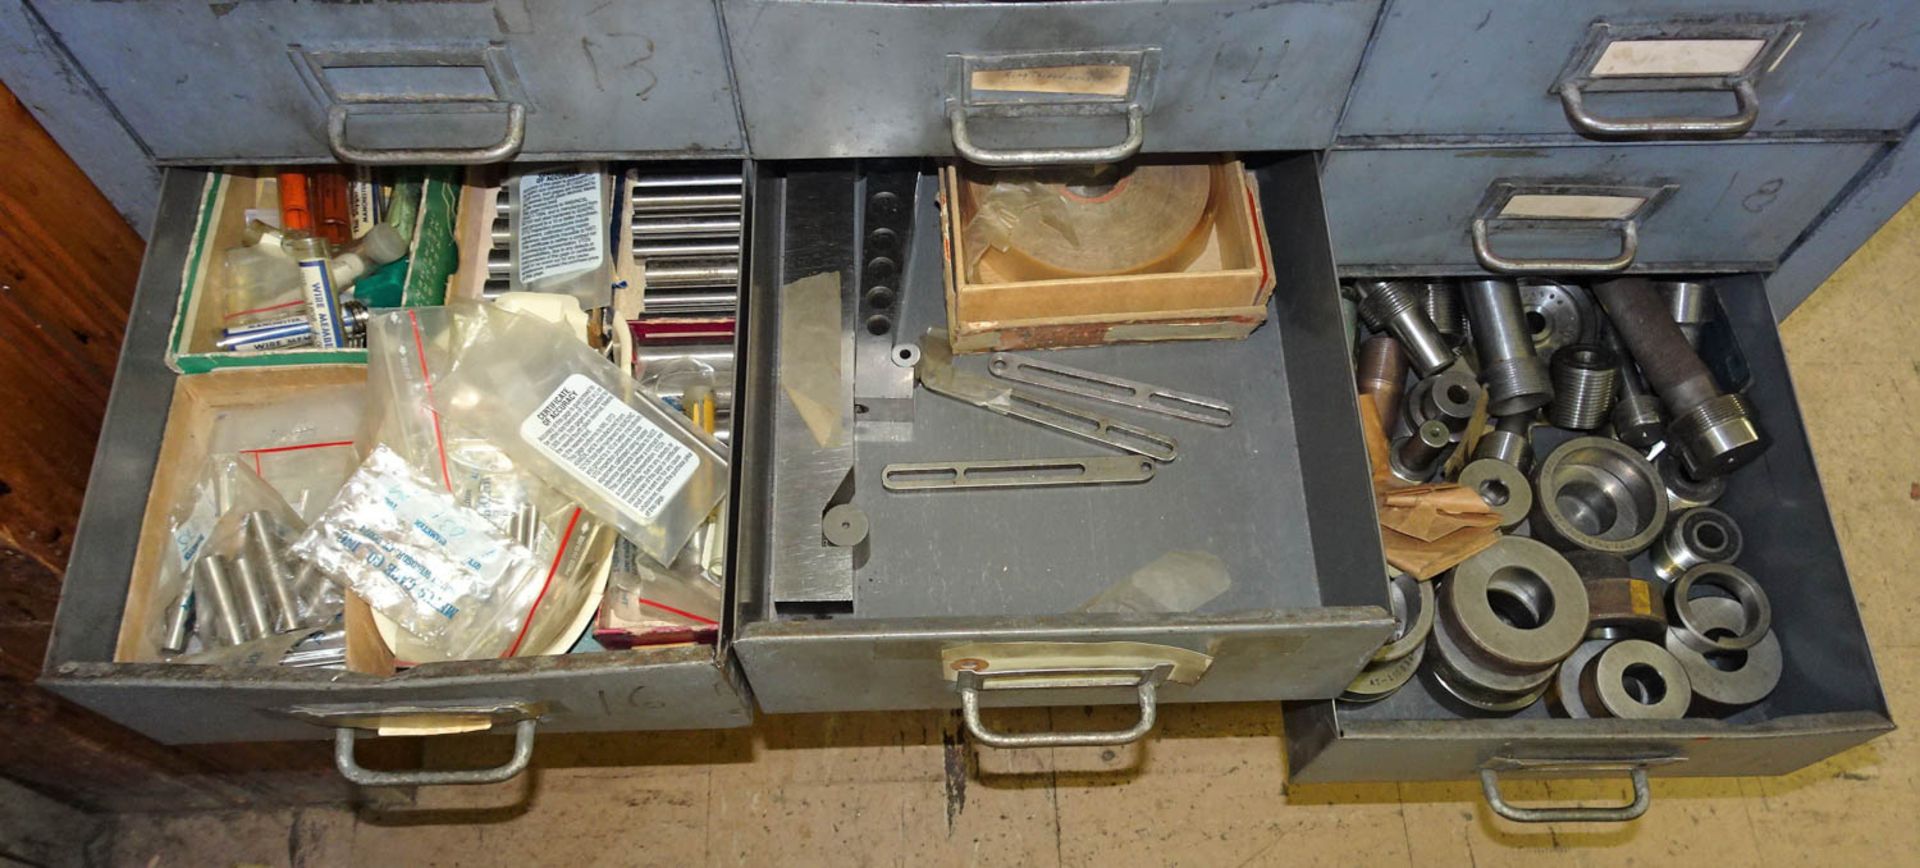 MULTI-DRAWER SMALL PARTS BIN WITH CABINET, CONTENTS INCLUDE: HELI-COIL, SHIMS, DRILL BITS, - Image 3 of 3